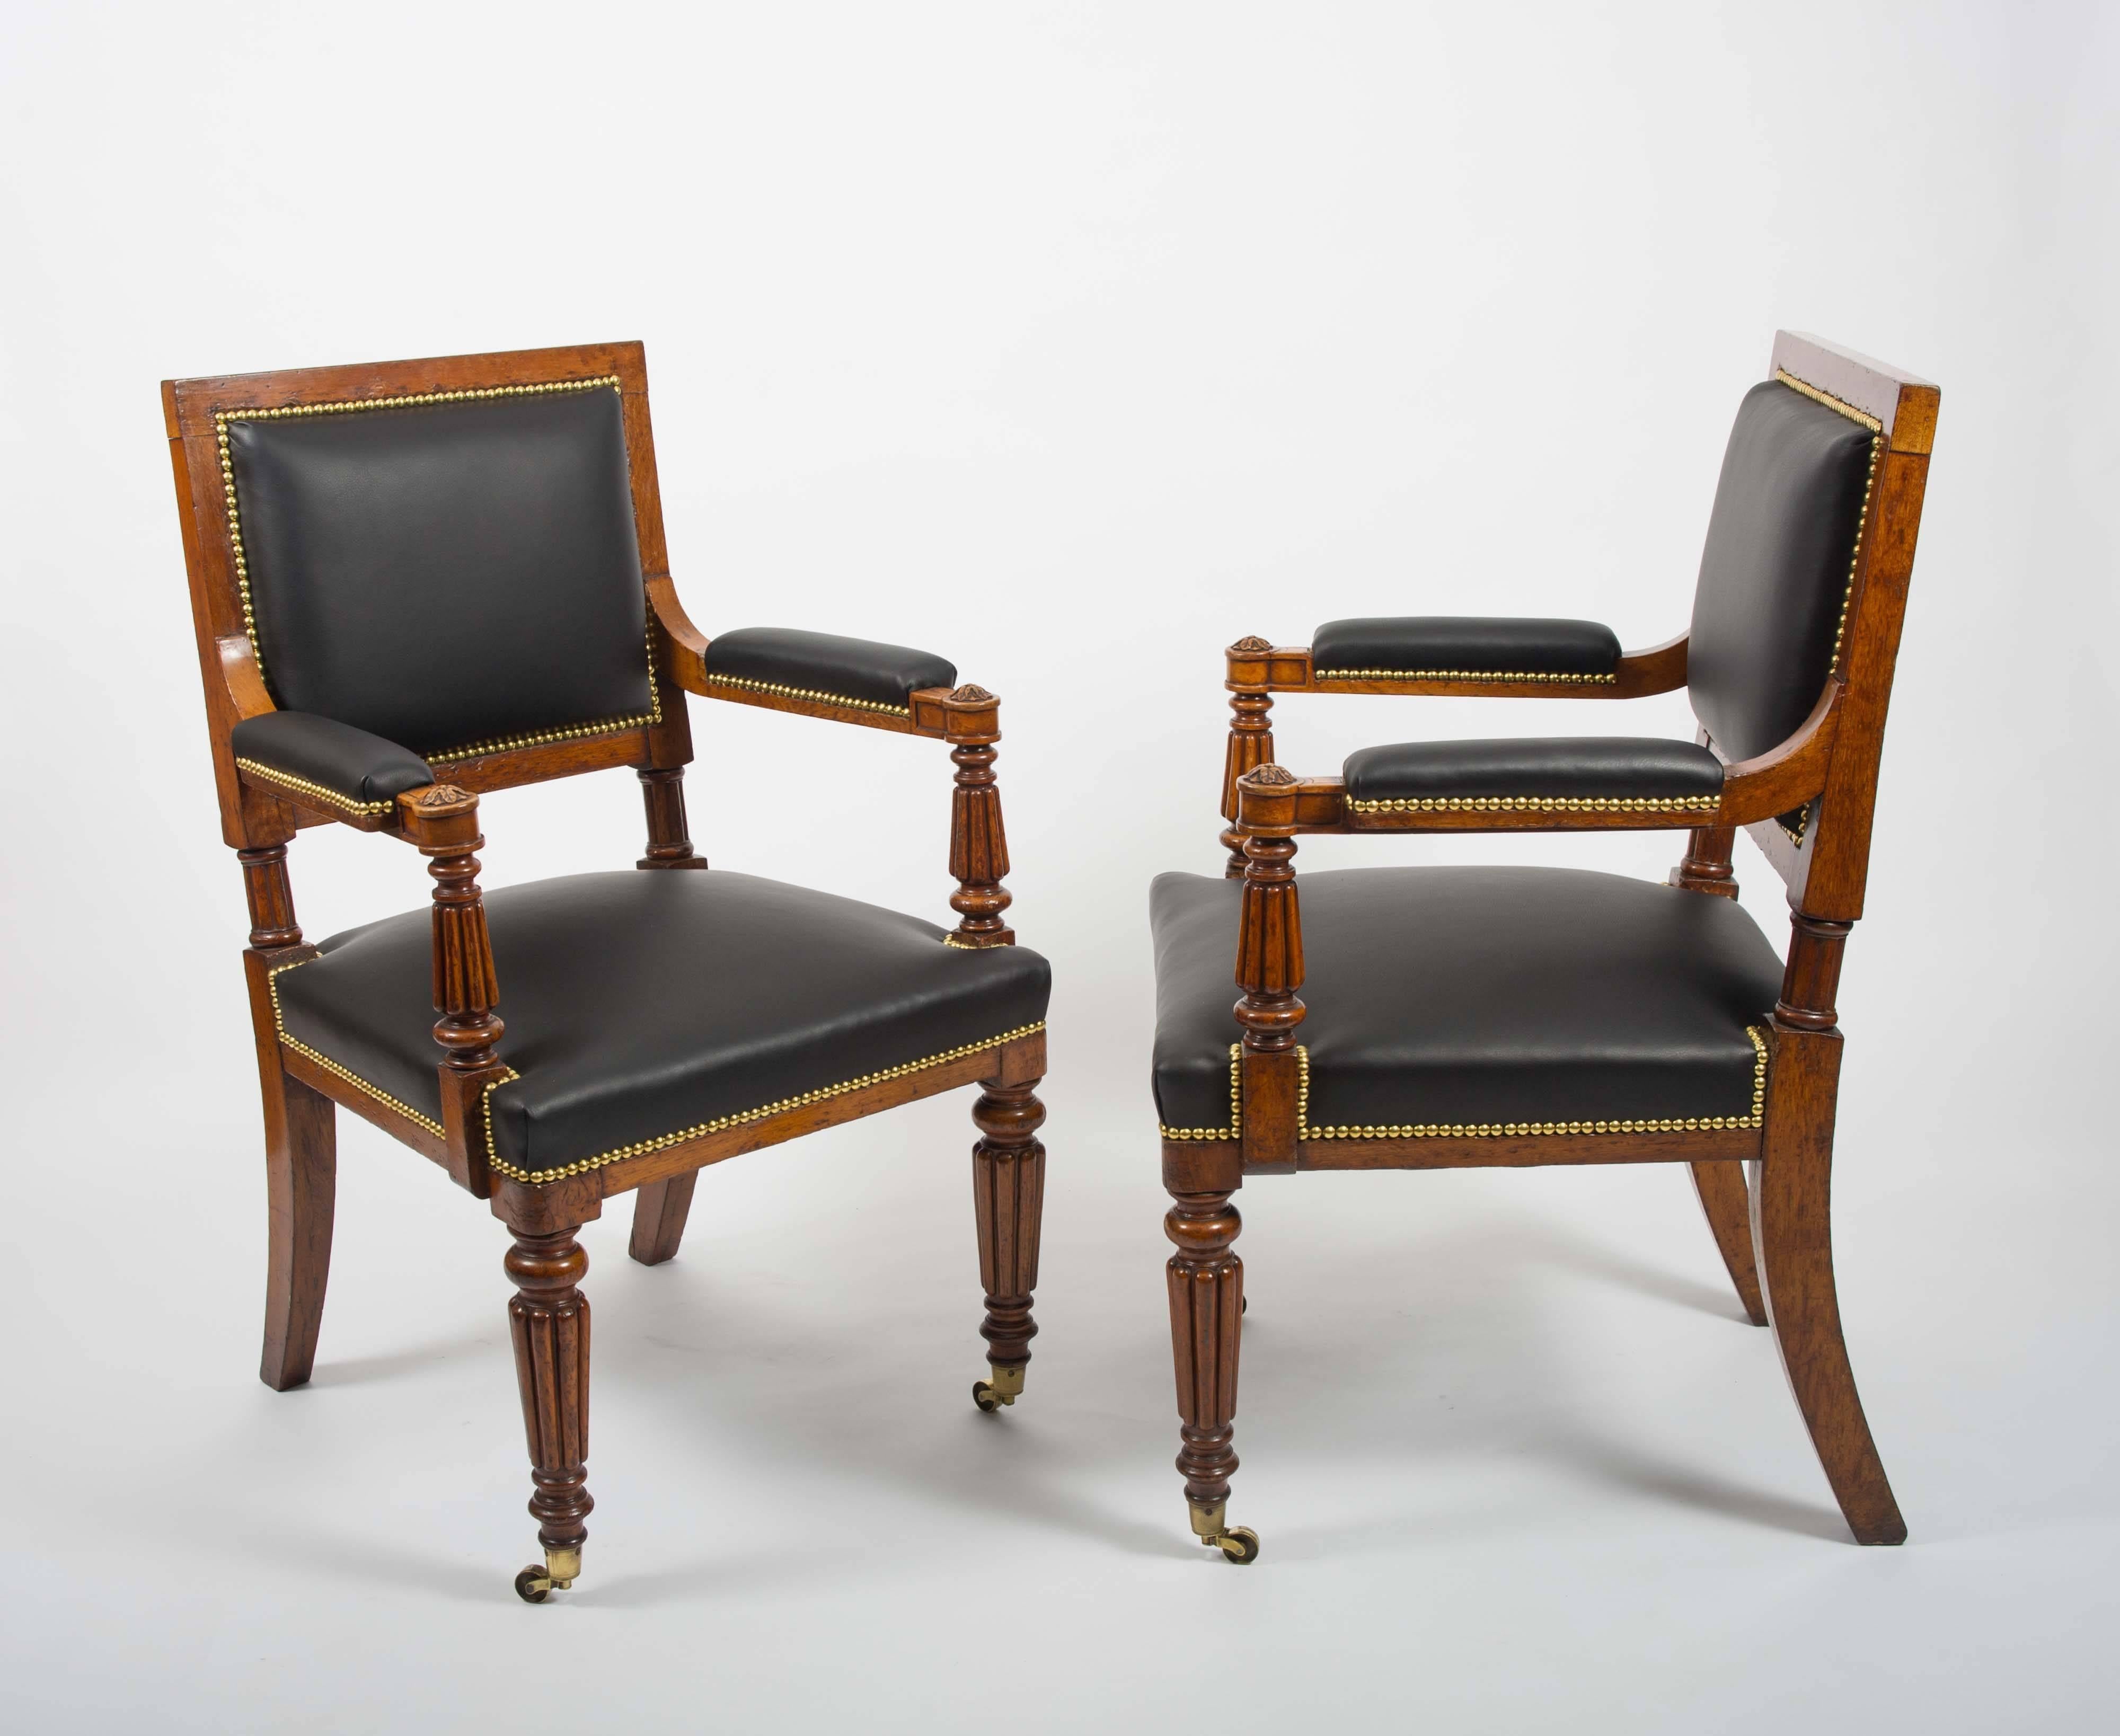 This gorgeous and superb pair of English oak elbow chairs feature swept back and front reeded legs on brass castors. They are upholstered in black leather with matching leather armrests and trimmed in brass stud detail. Each chair measures 24 ¼ in –